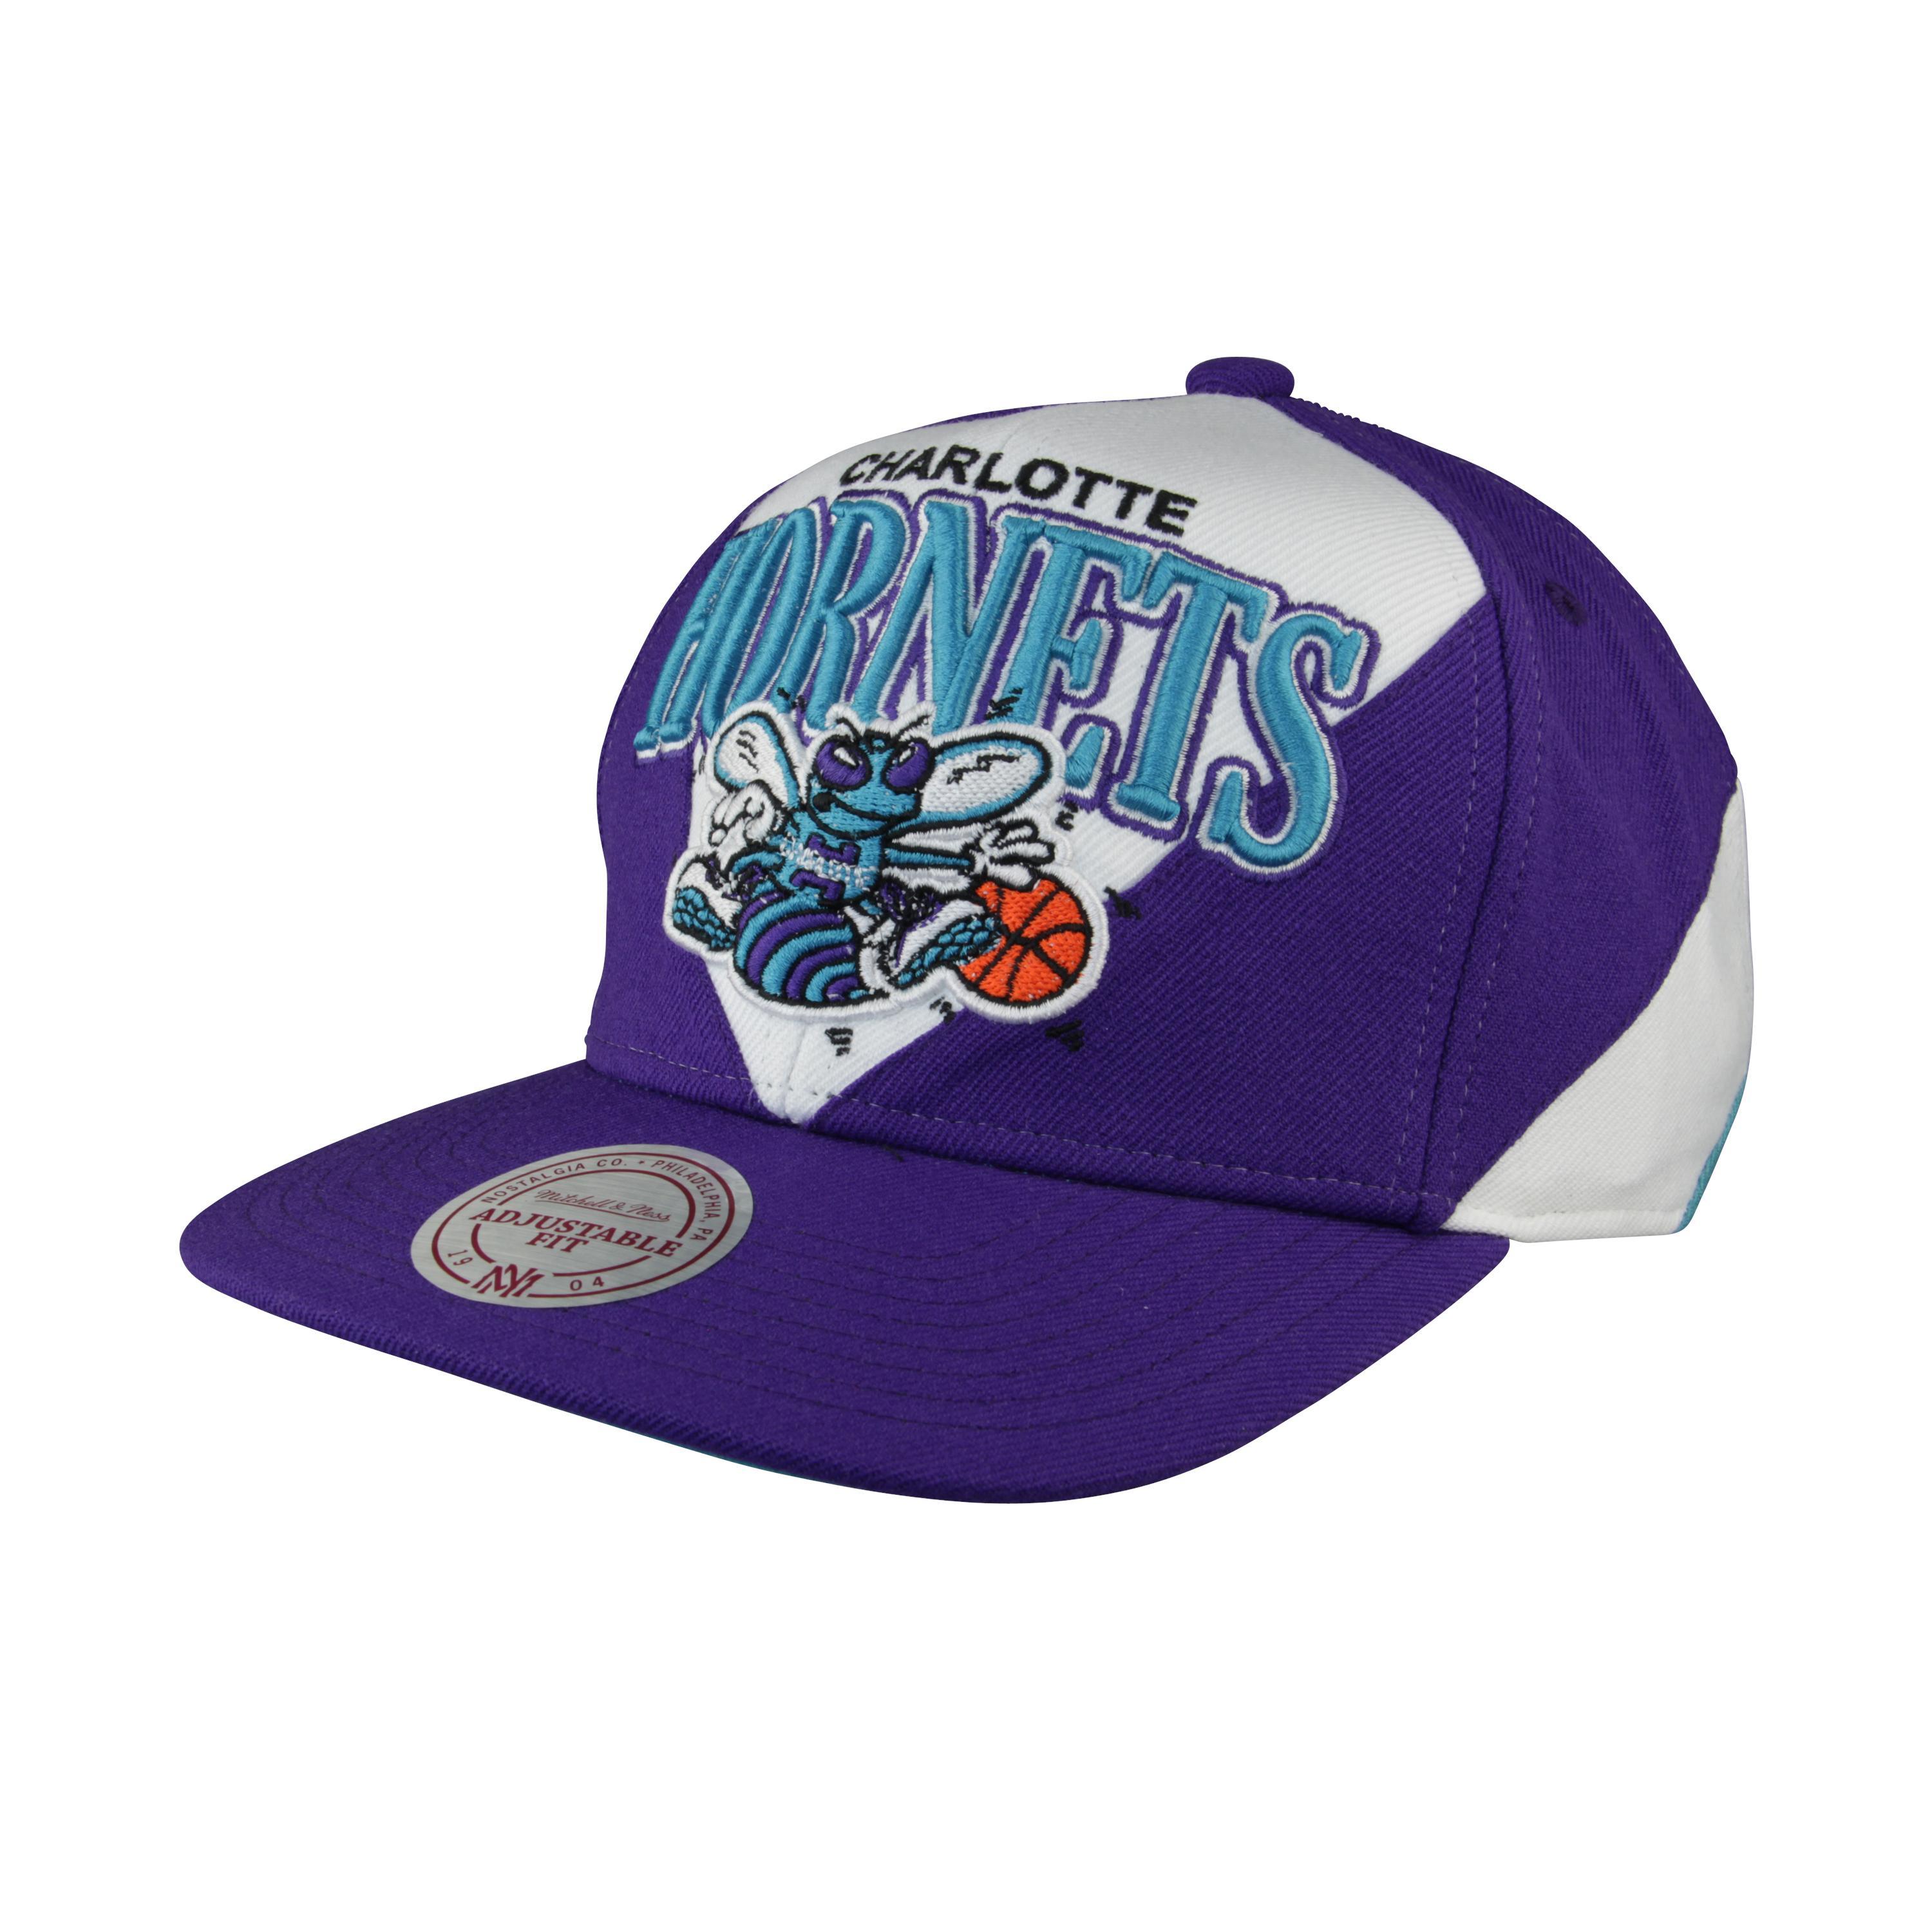 Foto Mitchell and Ness NBA Hornets Snap Back foto 524006